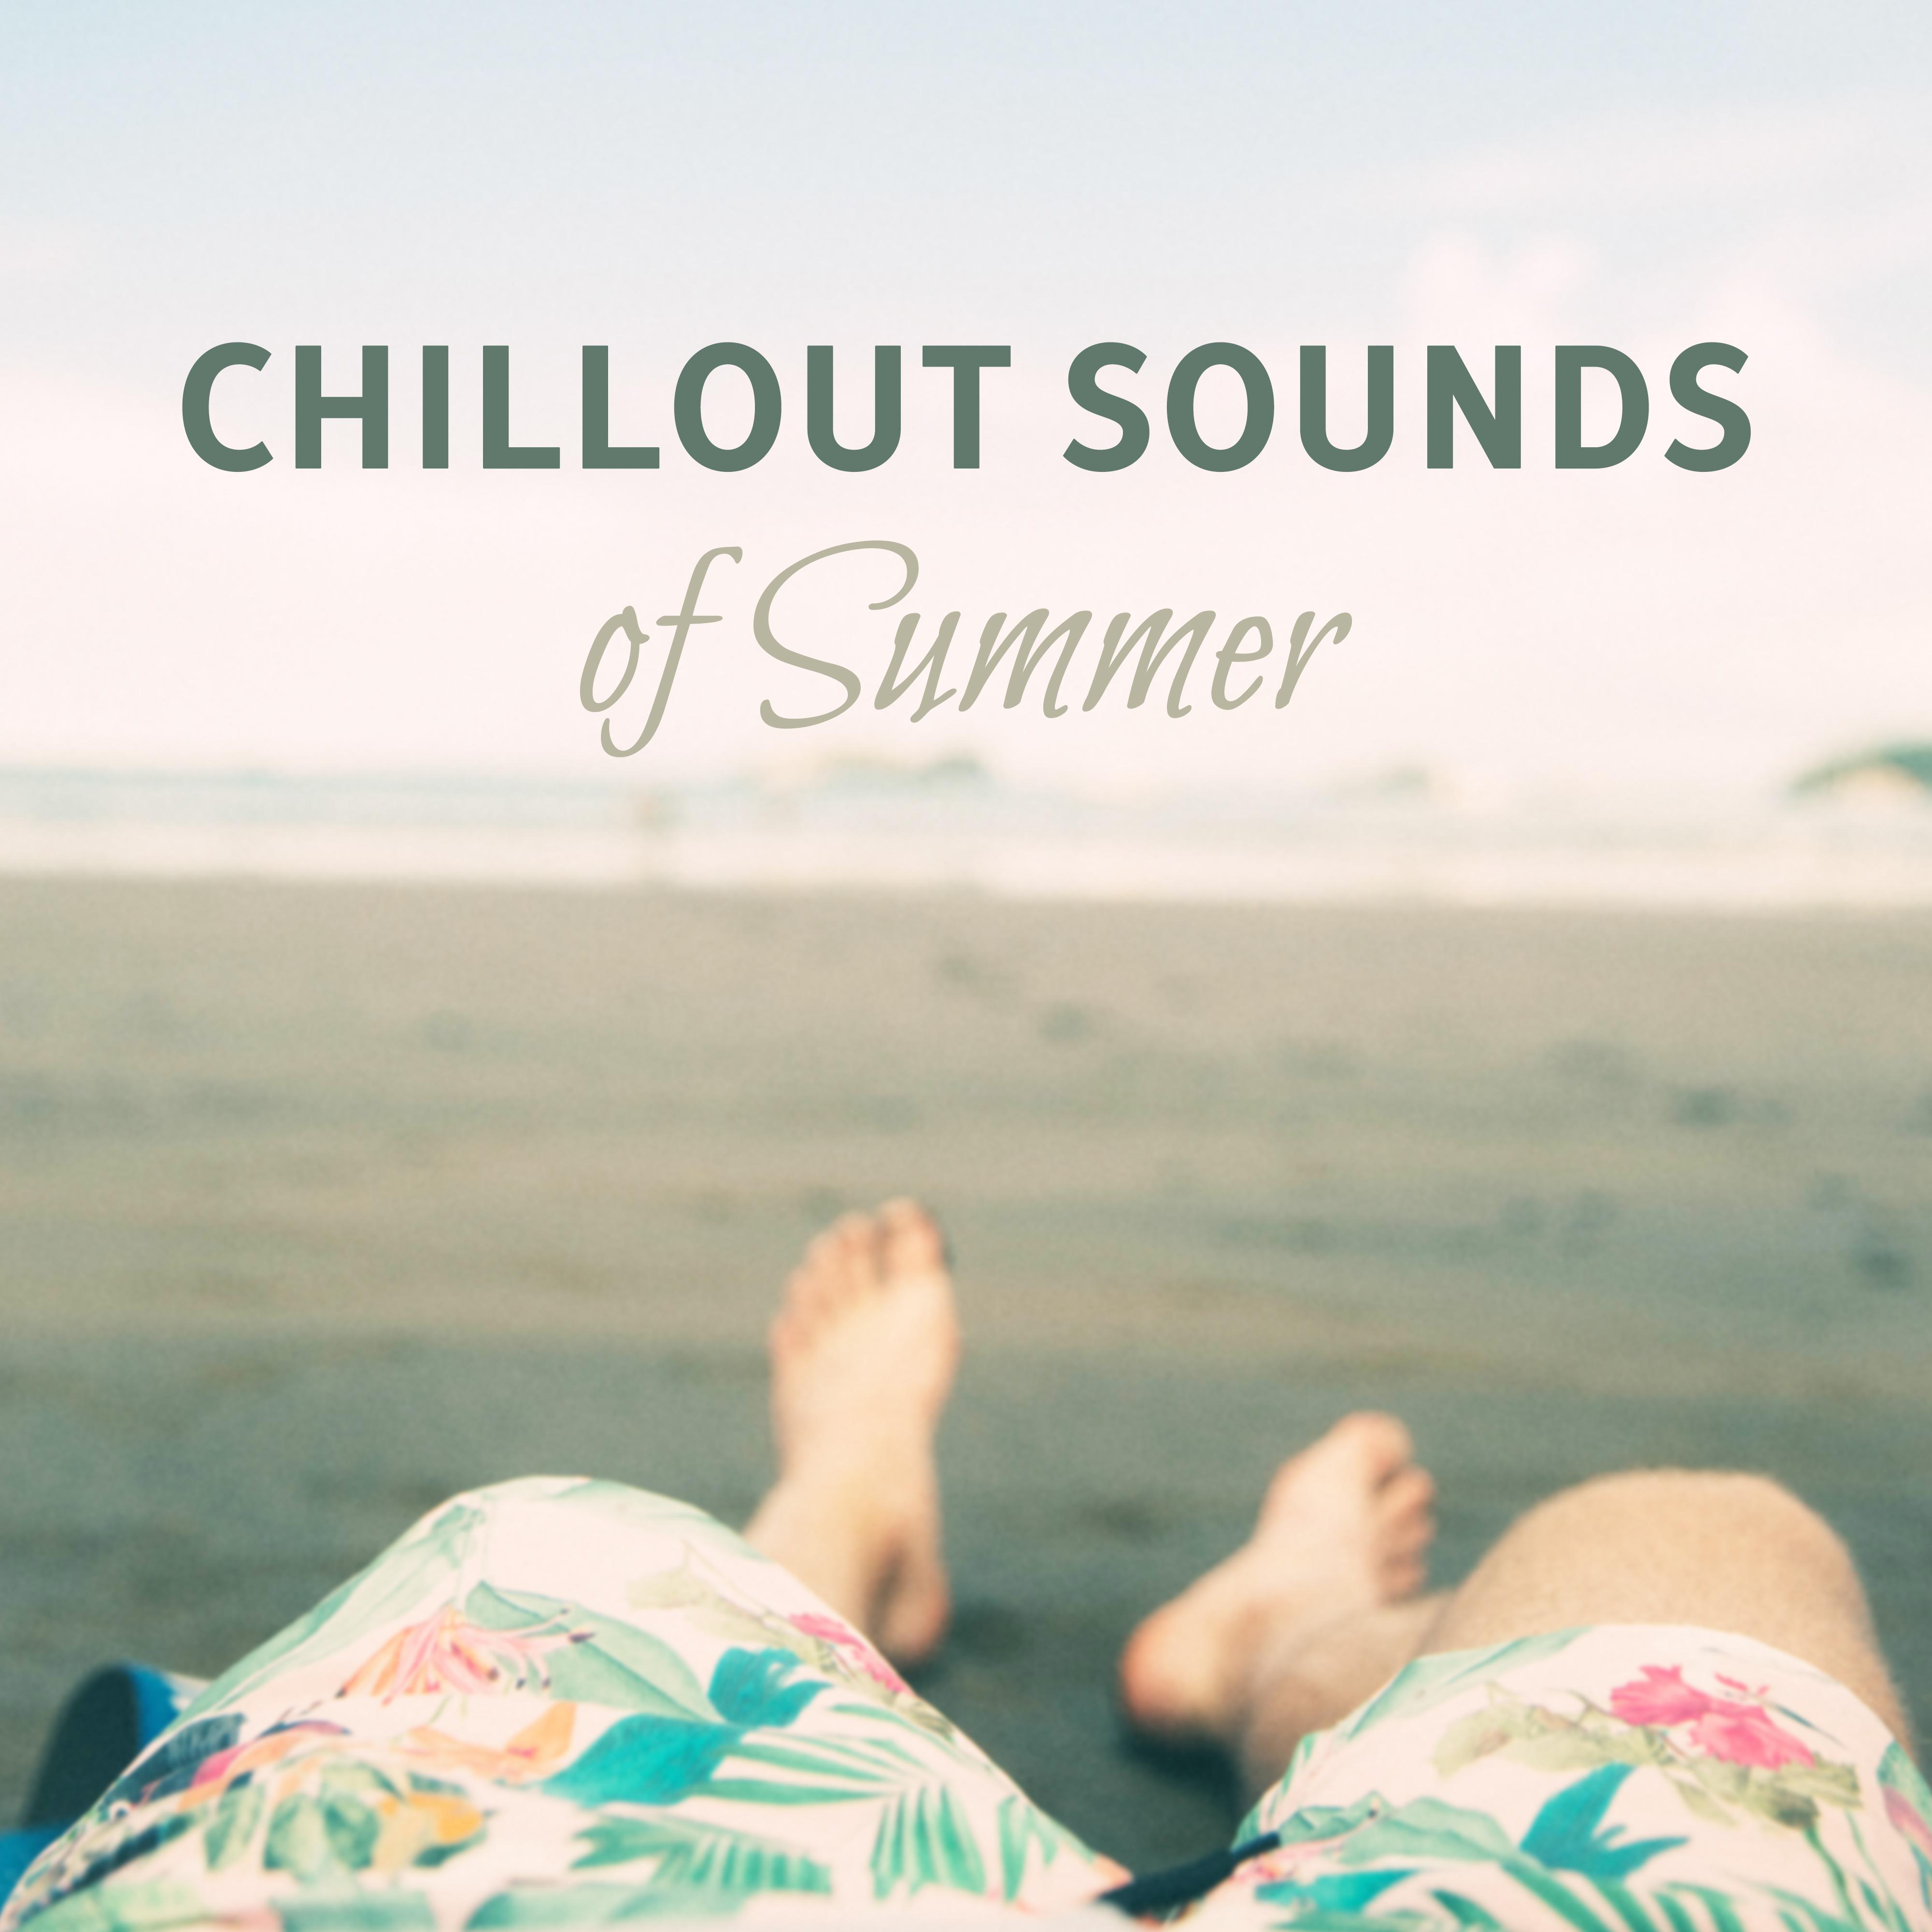 Chillout Sounds of Summer